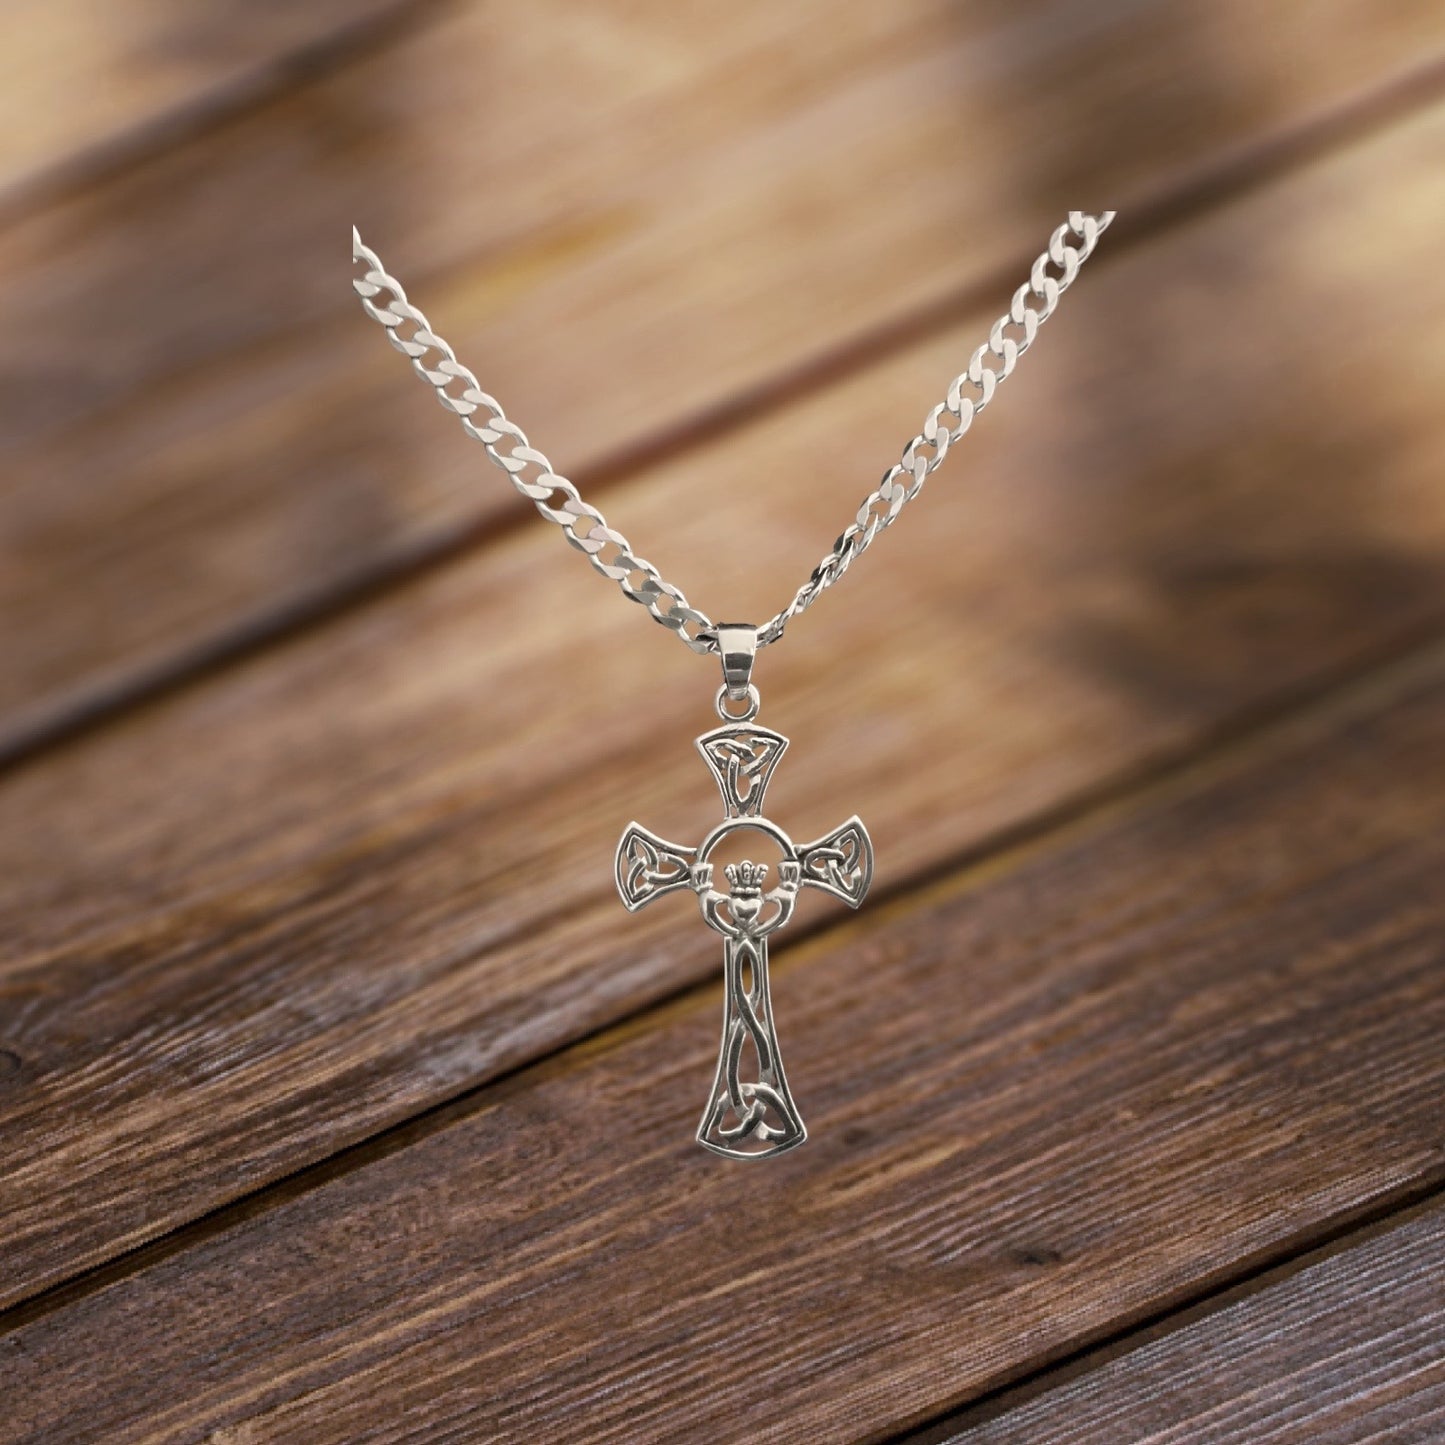 Large 925 Sterling Silver Unisex Irish Celtic Claddagh Claddaugh Cross Pendant Necklace Free Chain